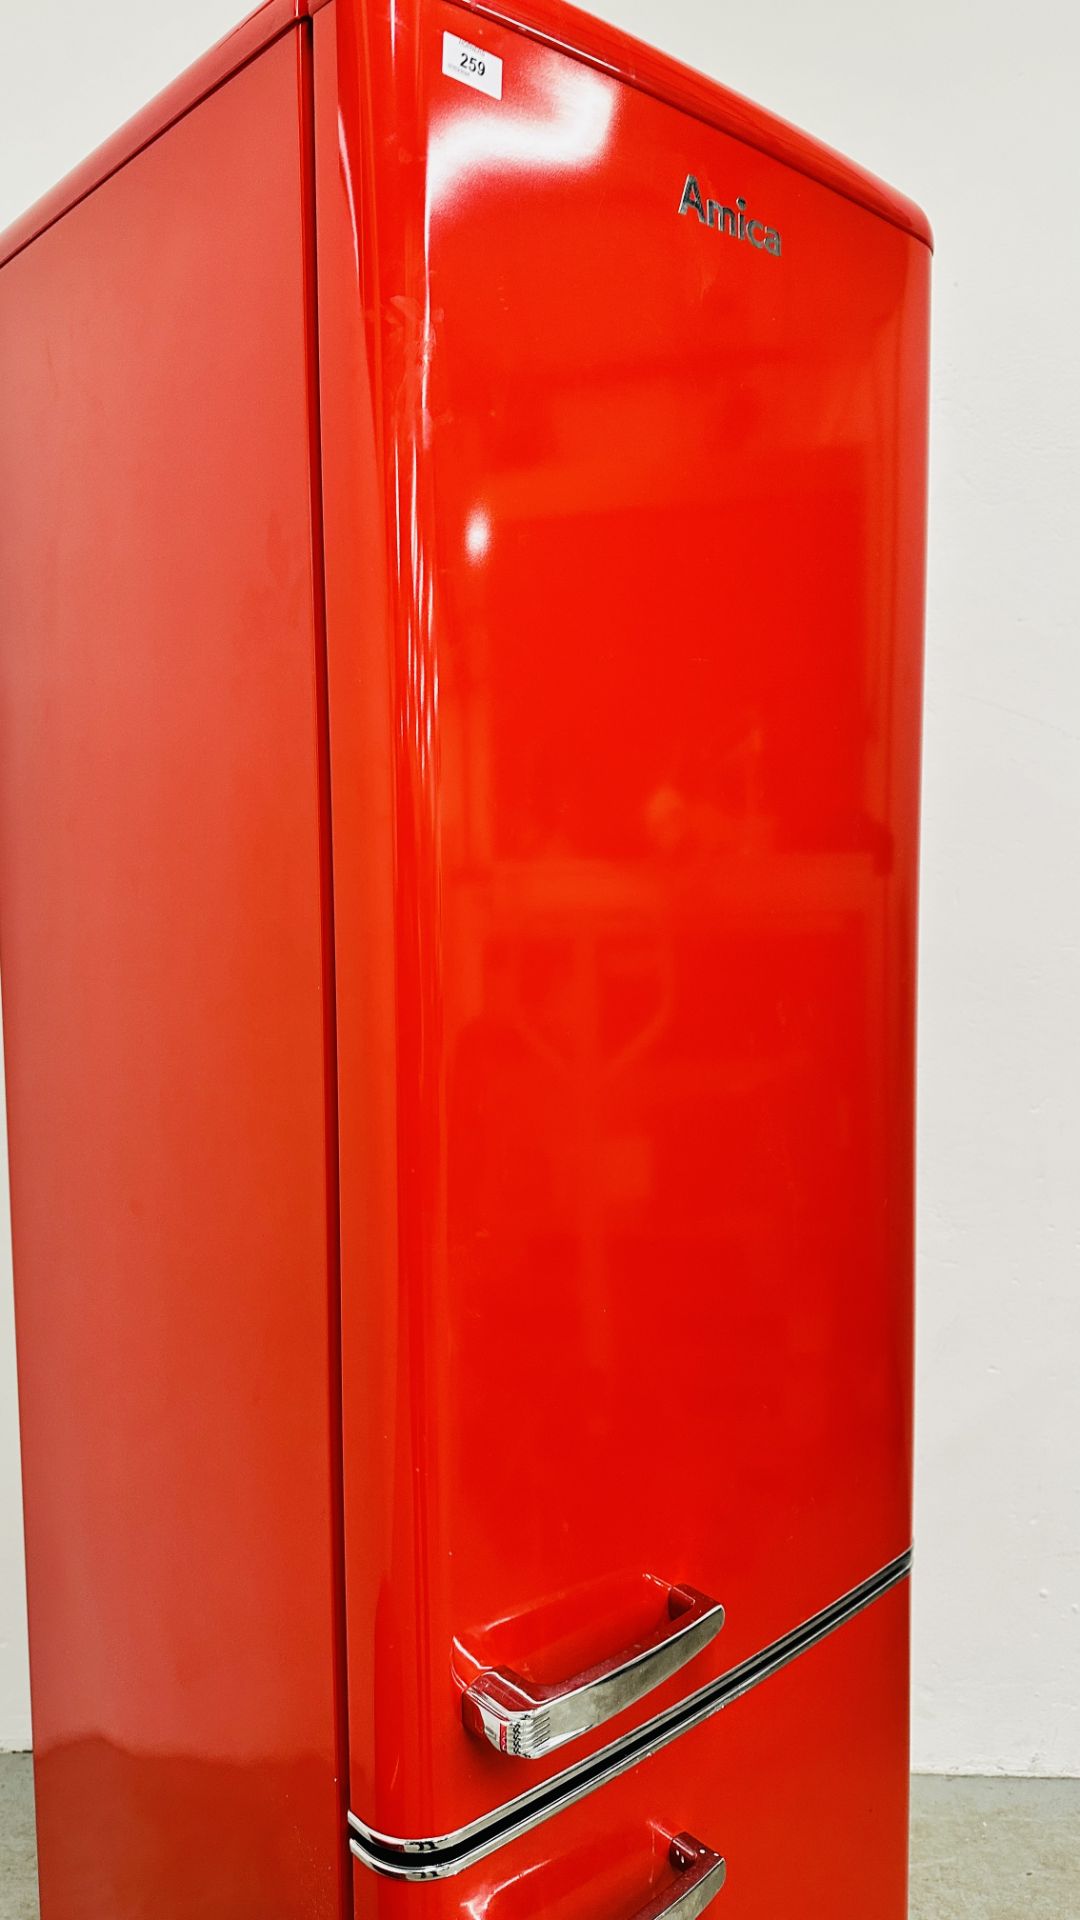 RETRO STYLE AMICA RED FINISH FRIDGE FREEZER + RED PEDAL BIN - SOLD AS SEEN. - Image 6 of 10